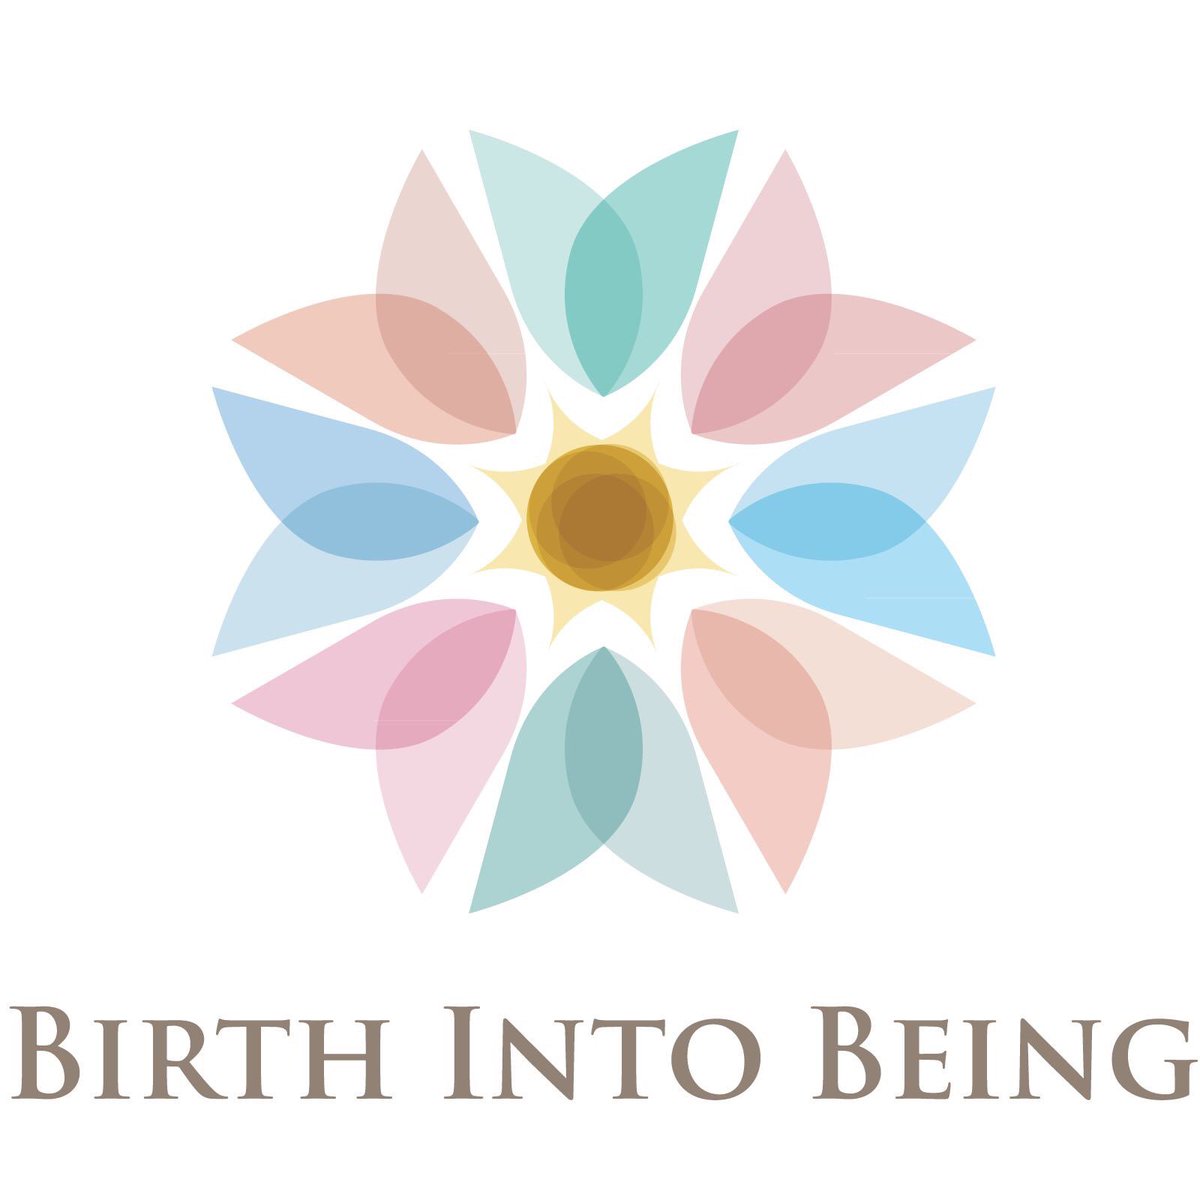 @BirthtoBeingUK supports parents with a range of courses, classes and workshops, from pre-pregnancy all the way through to preschool. Come and meet Alex in May at our St Albans event to see how she support you from pre pregnancy through to preschool #stalbansbabyshow #showsponsor